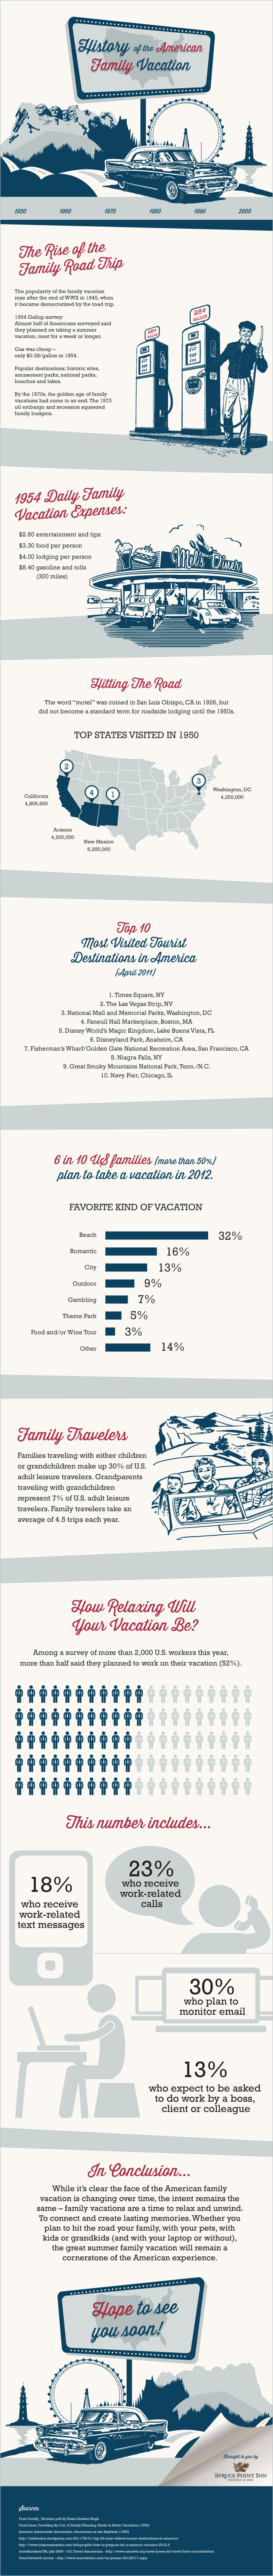 history-of-the-american-family-vacation_5047b35eead8b